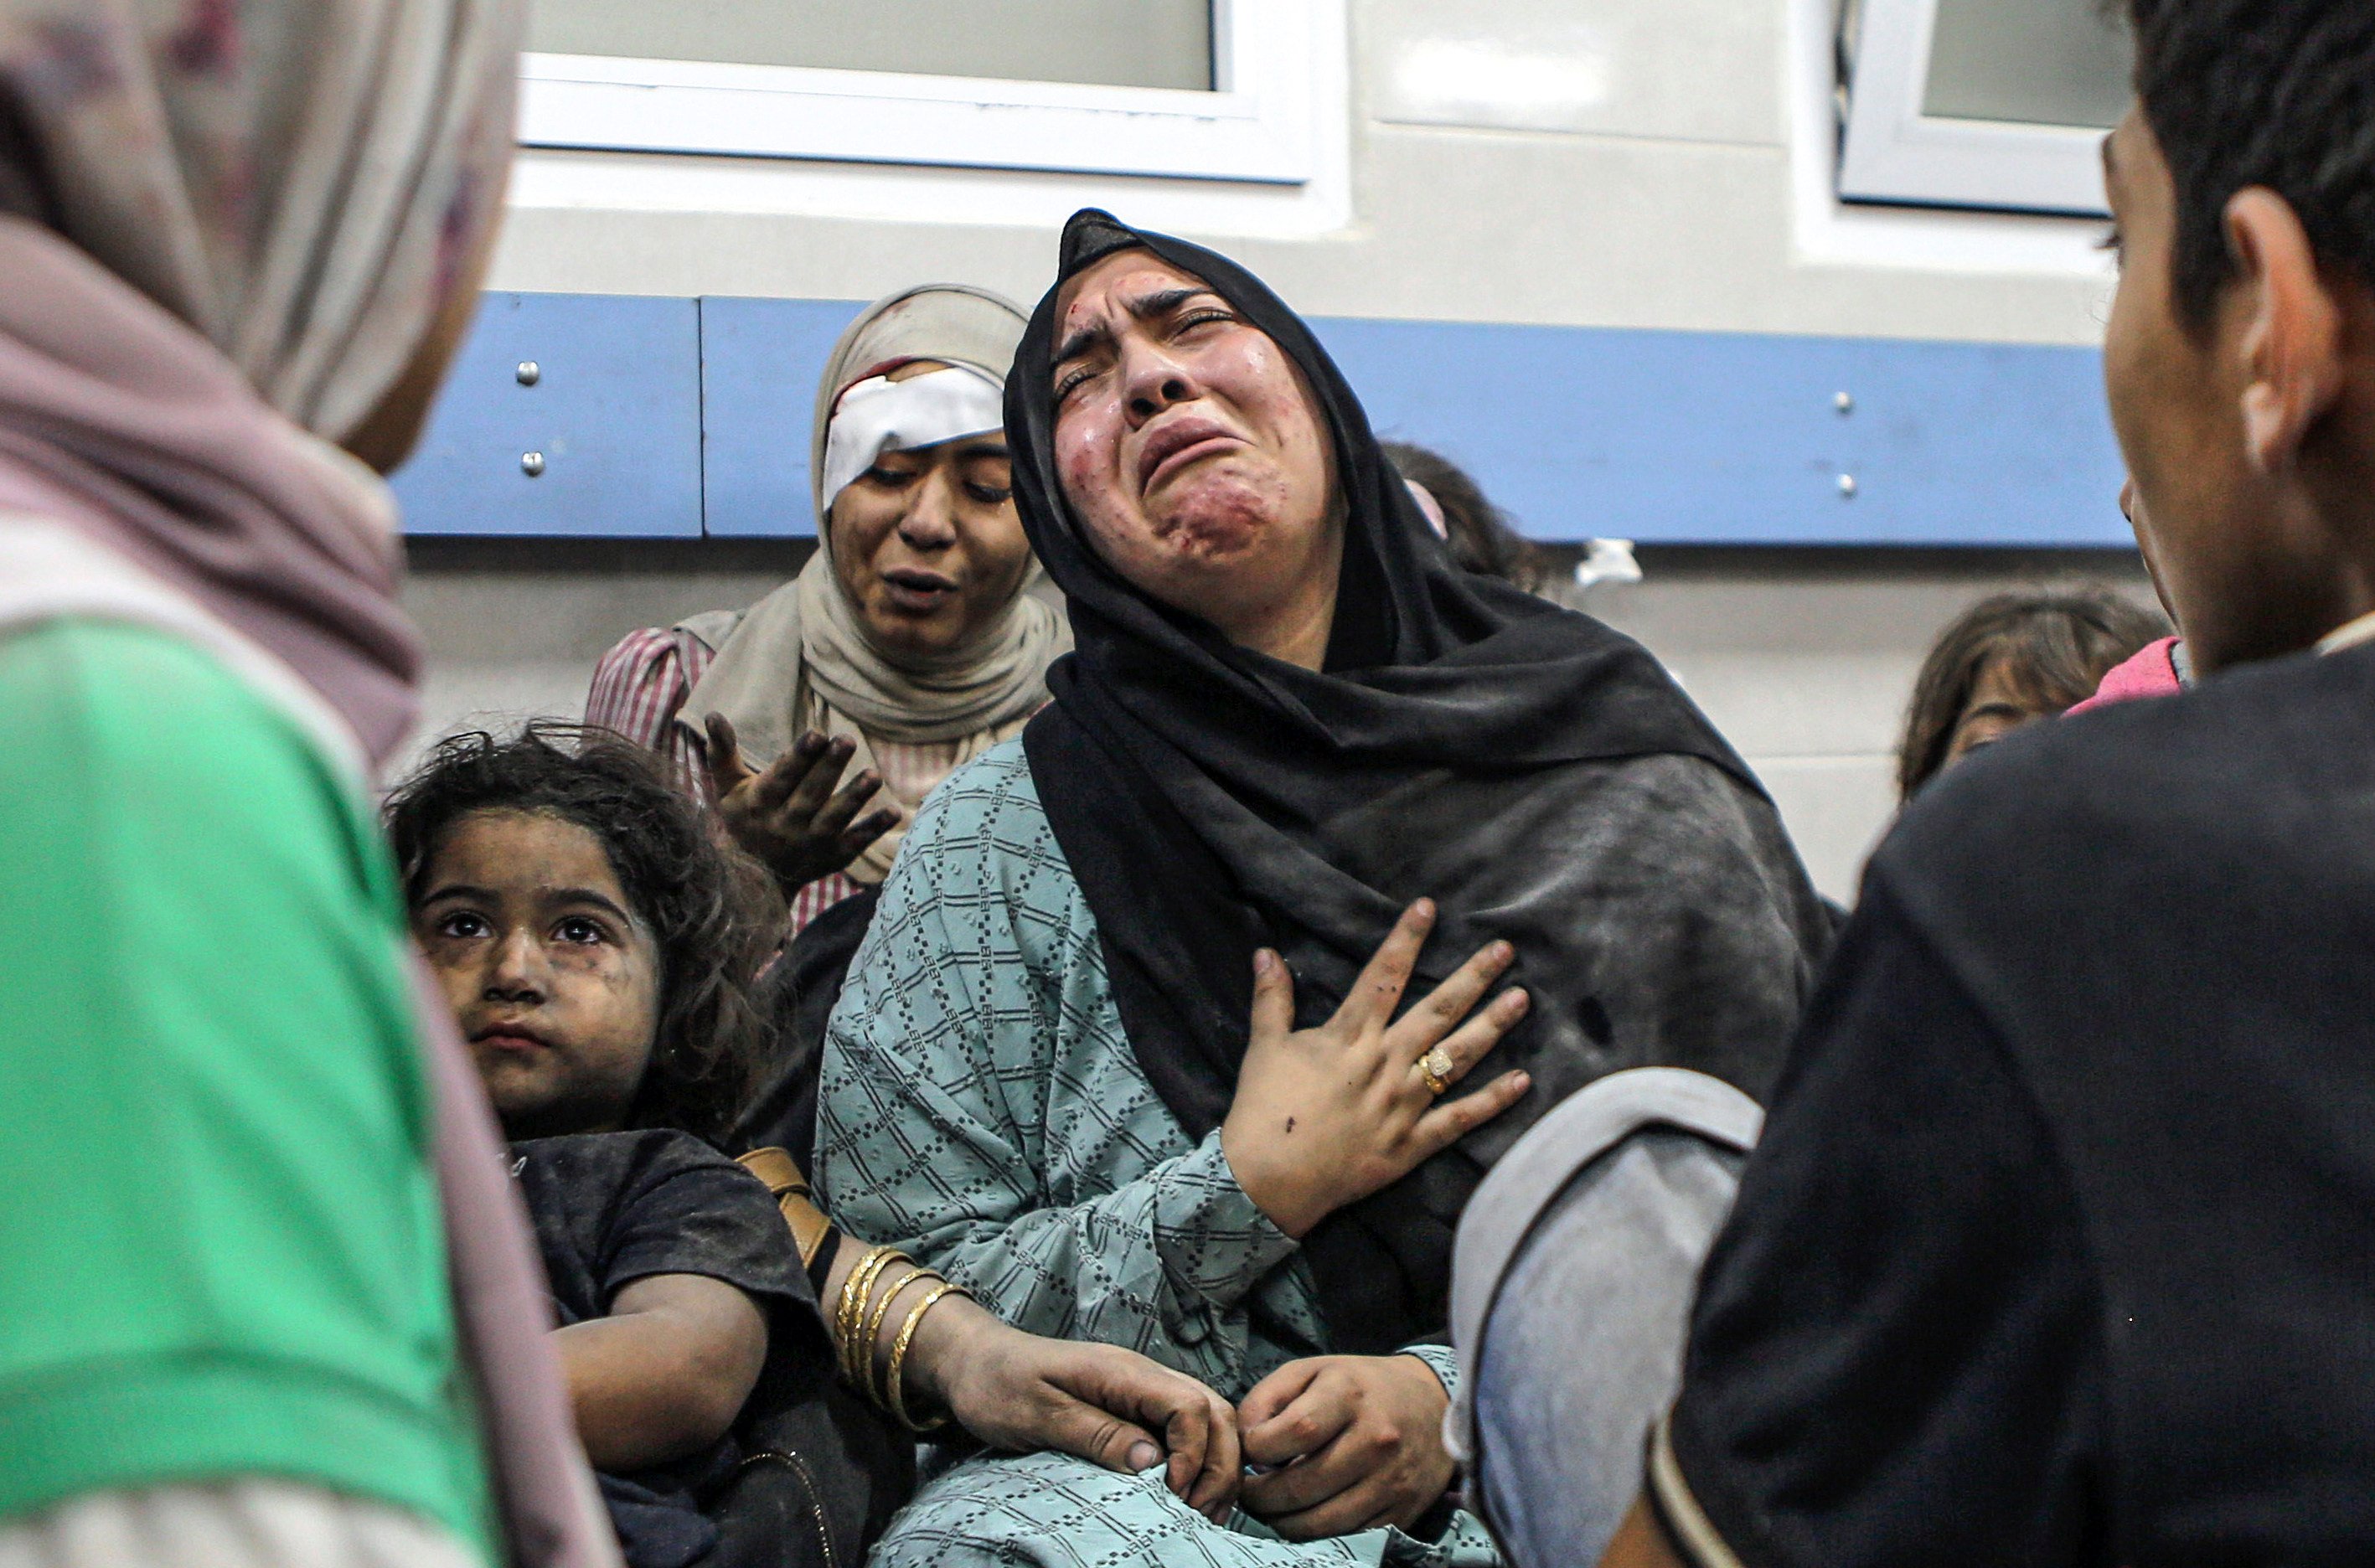 Wounded Palestinians at the al-Shifa hospital in Gaza City, after arriving from al-Ahli hospital following an explosion there that killed hundreds. Photo: AP